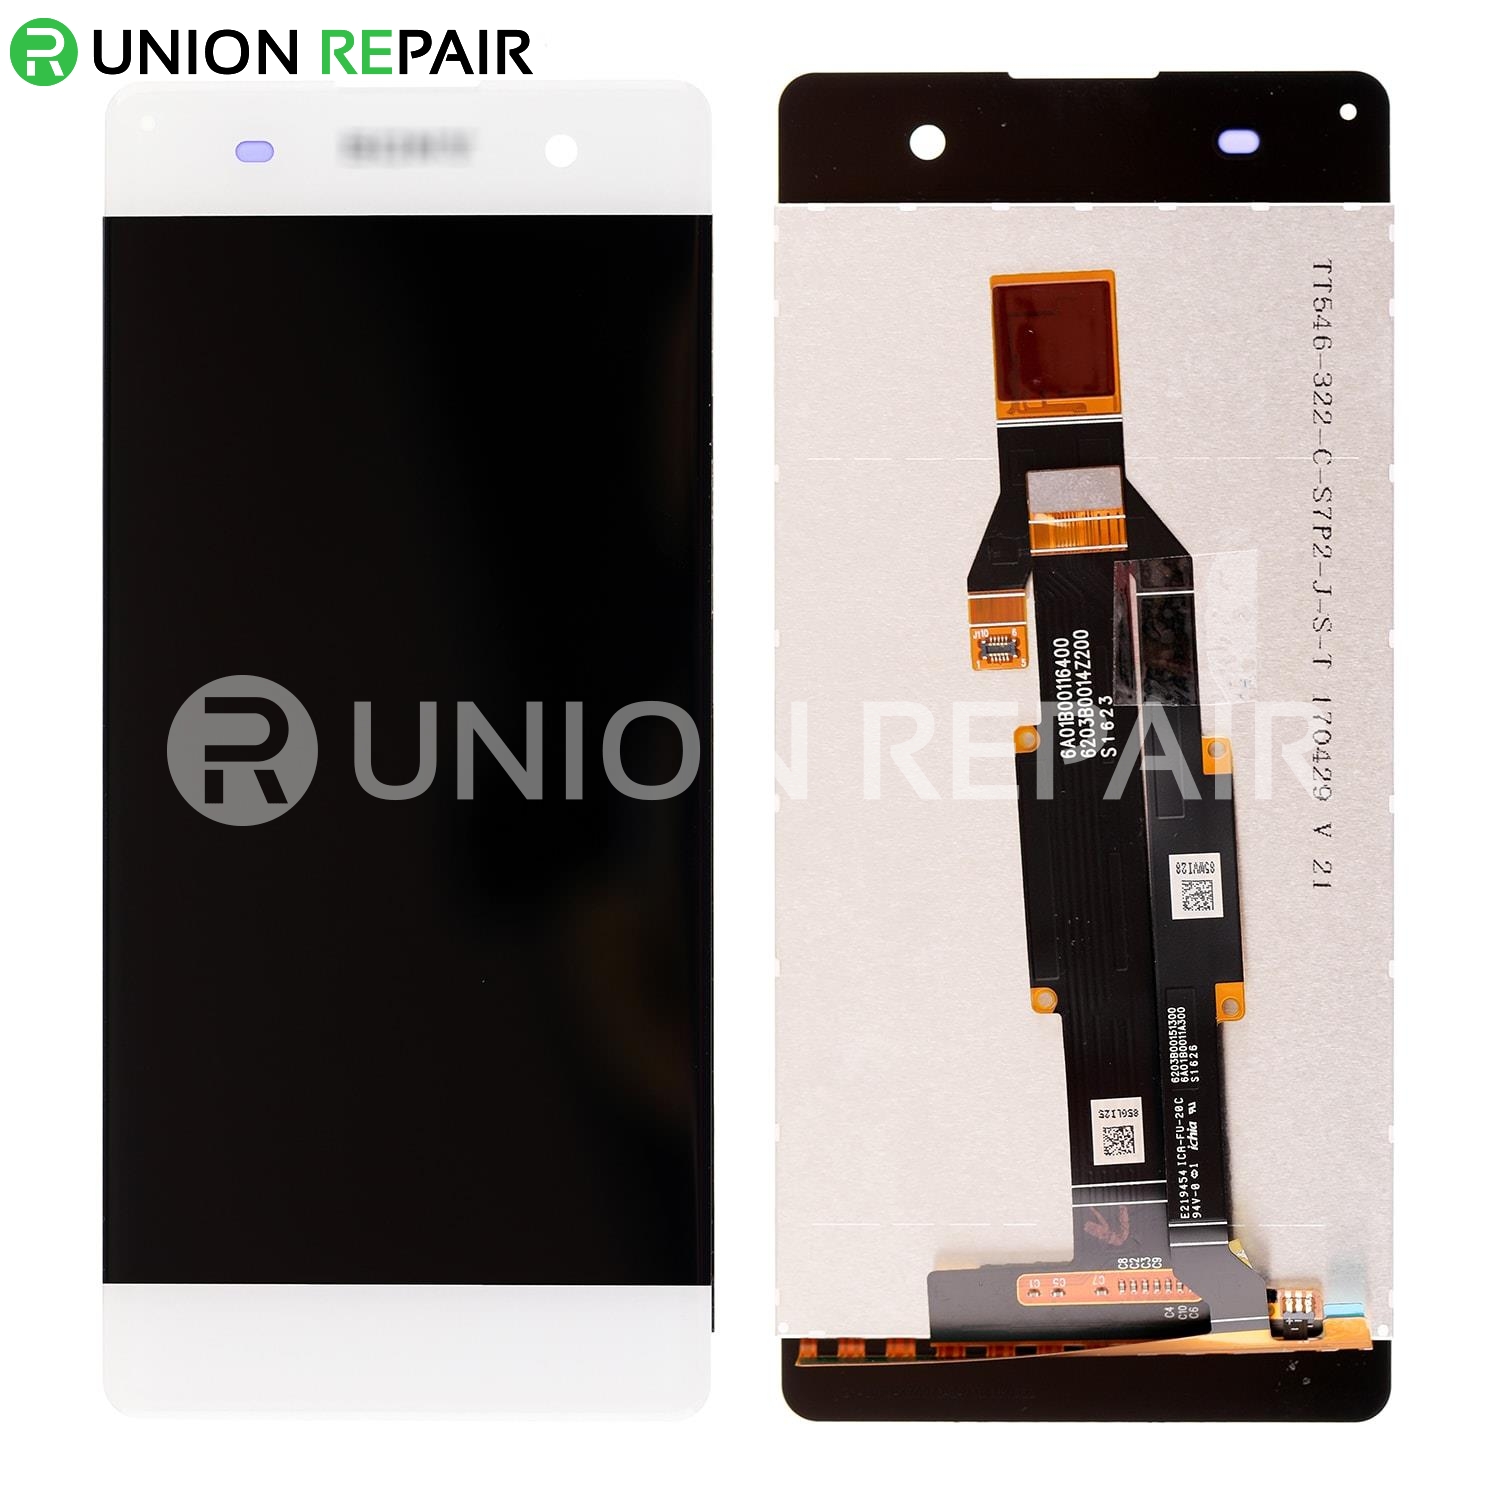 Polair Baffle Renovatie Replacement for Sony Xperia XA LCD Screen with Digitizer Assembly - White